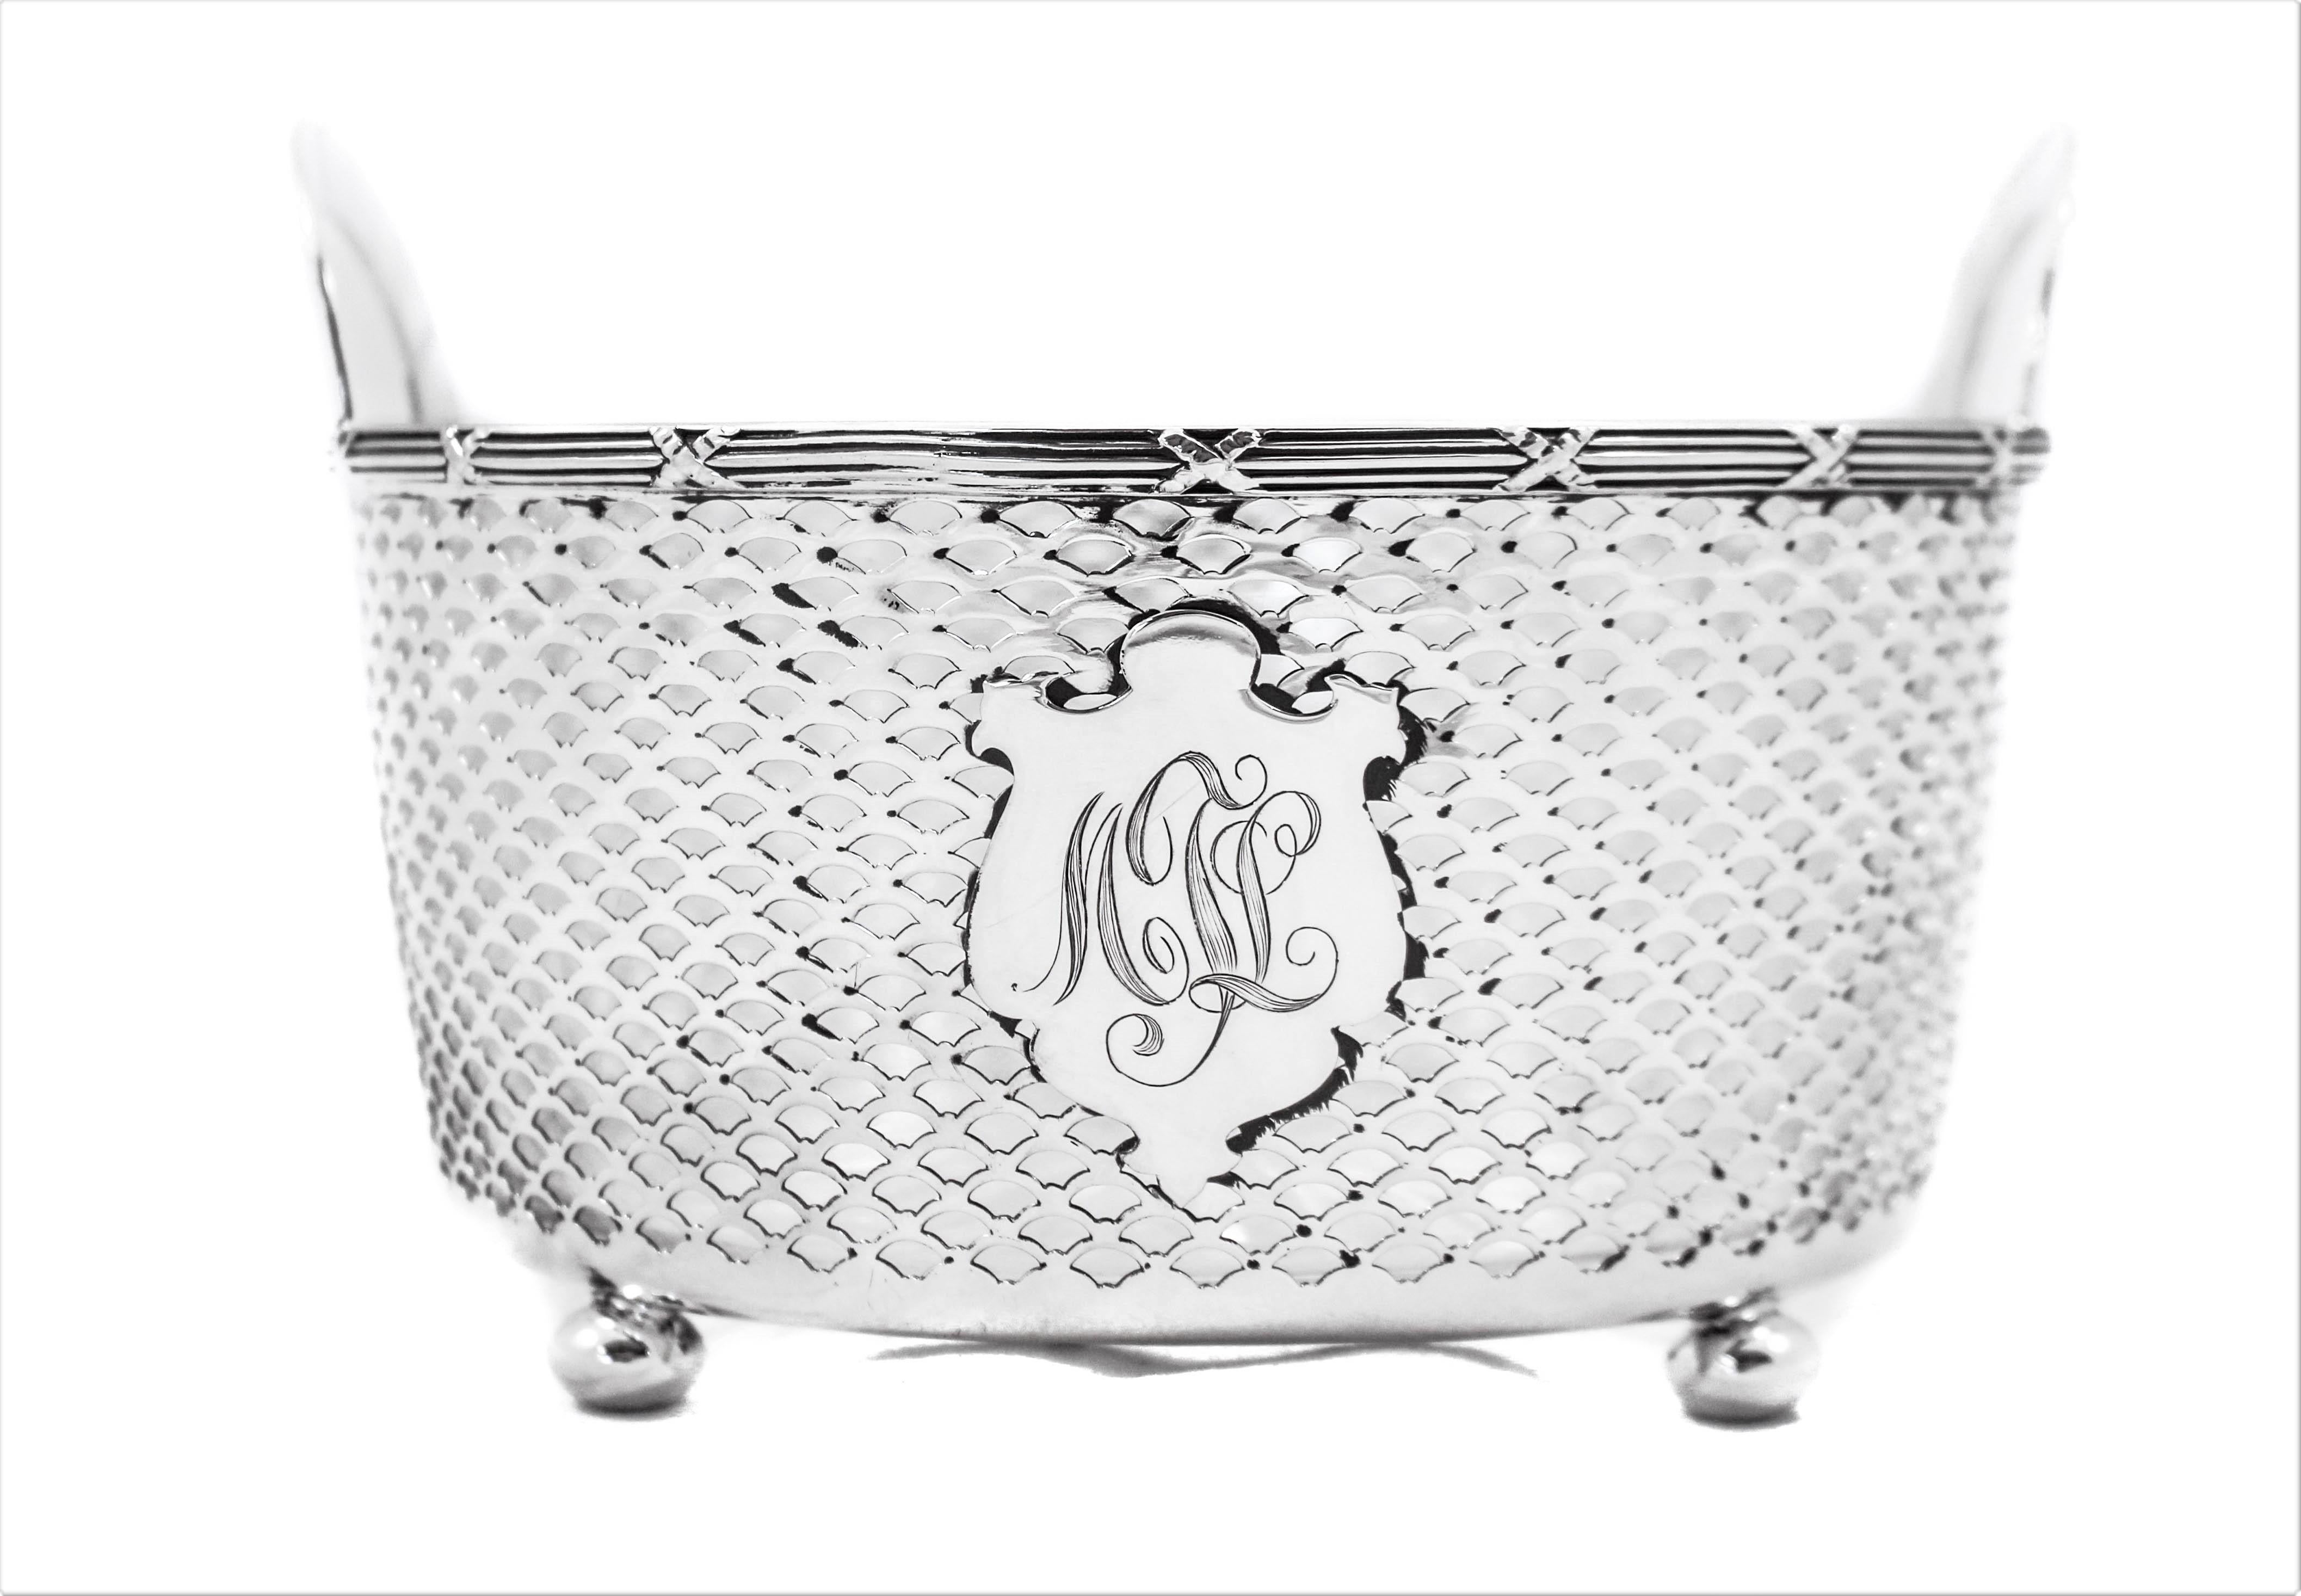 We are happy to offer this sterling silver ice bucket with the original glass liner. Notice the gorgeous starburst on the glass bottom. The liner is removable making it a super easy to wash and return. The sterling is reticulated with a cartouche in